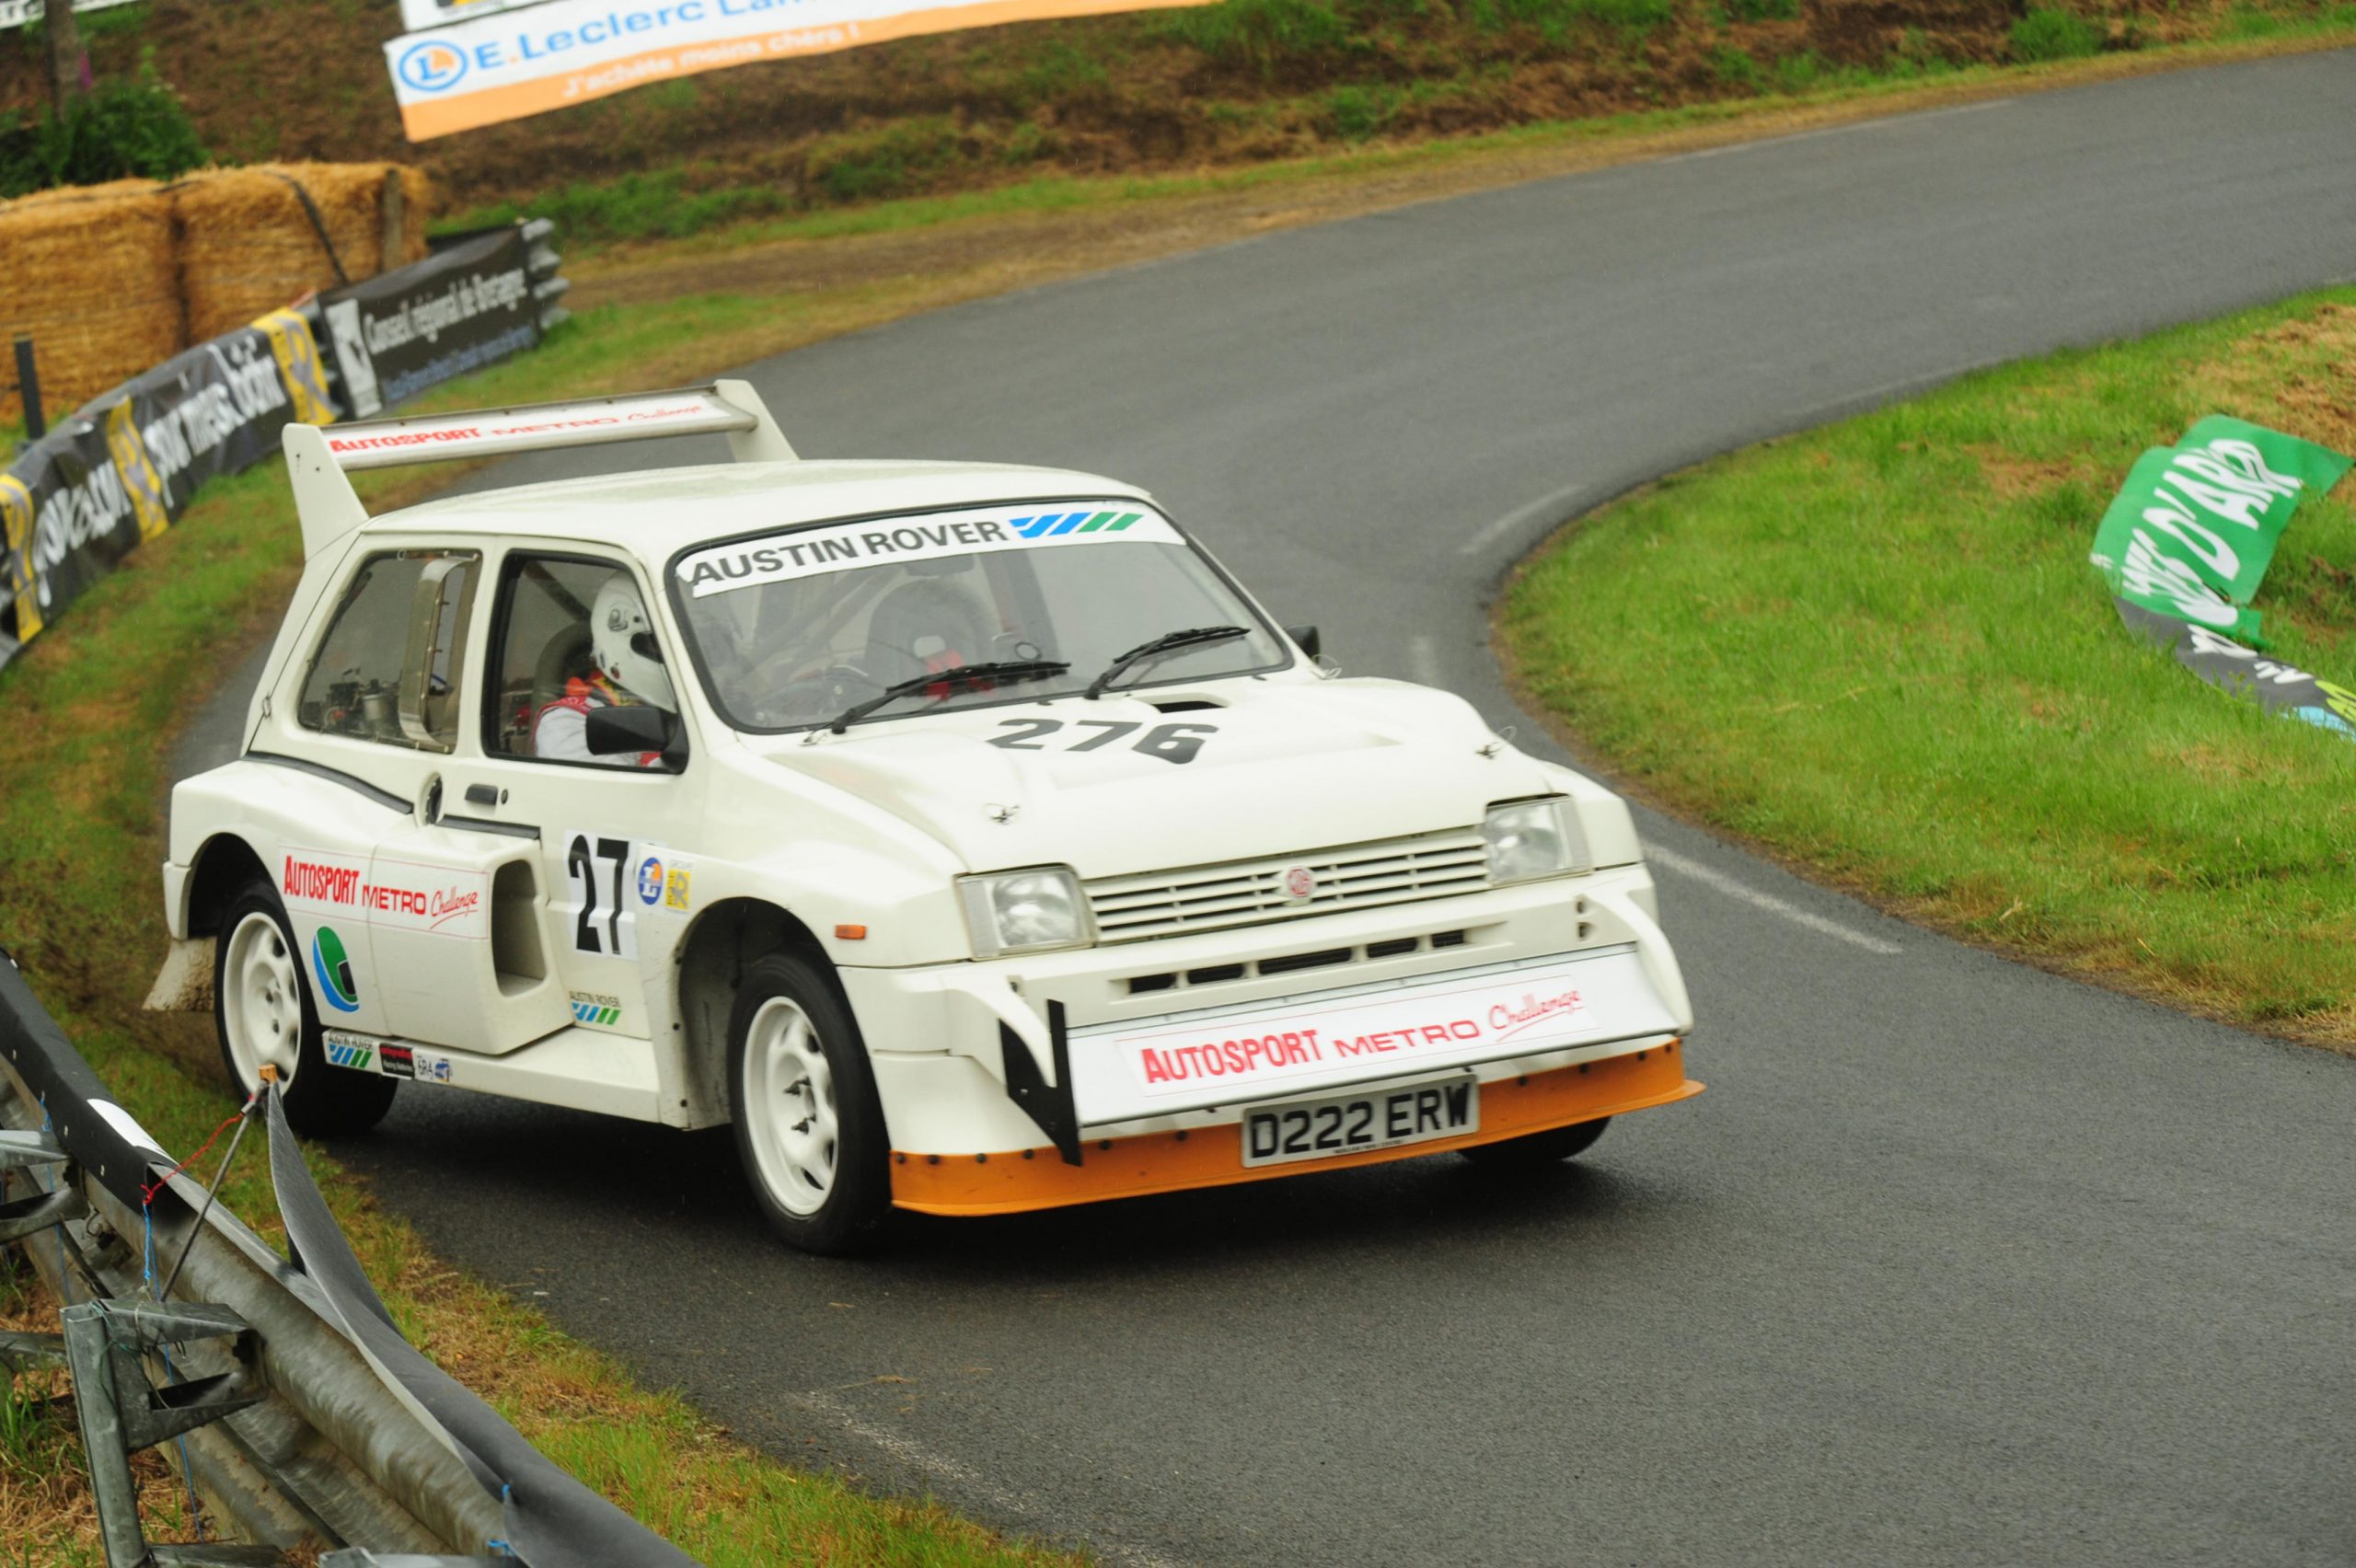 Your Classics: John Pick and the MG Metro 6R4 he won in a competition